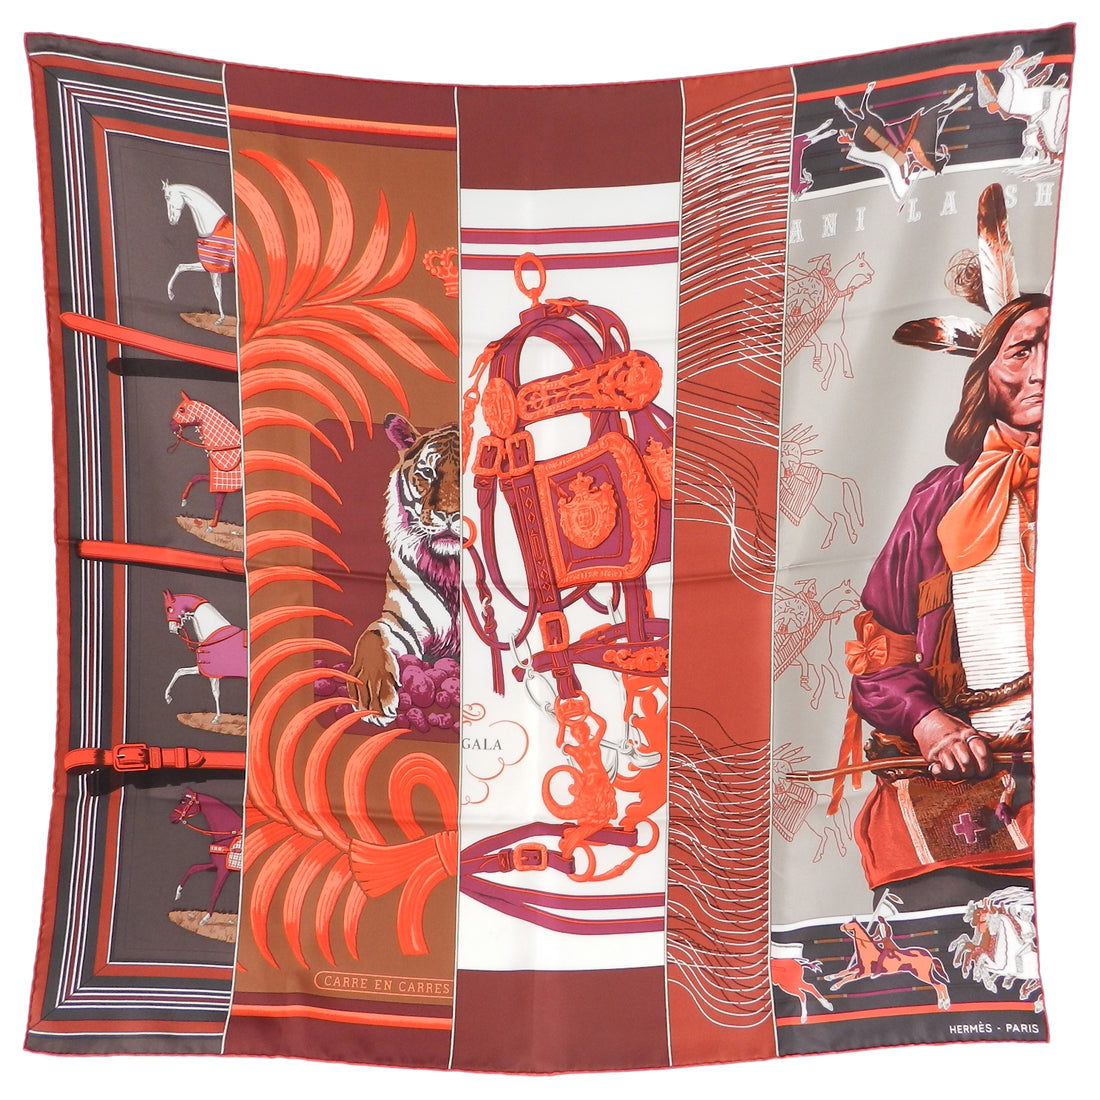 Hermes Carre en Carres 90cm Silk Twill Scarf and Knotting Cards